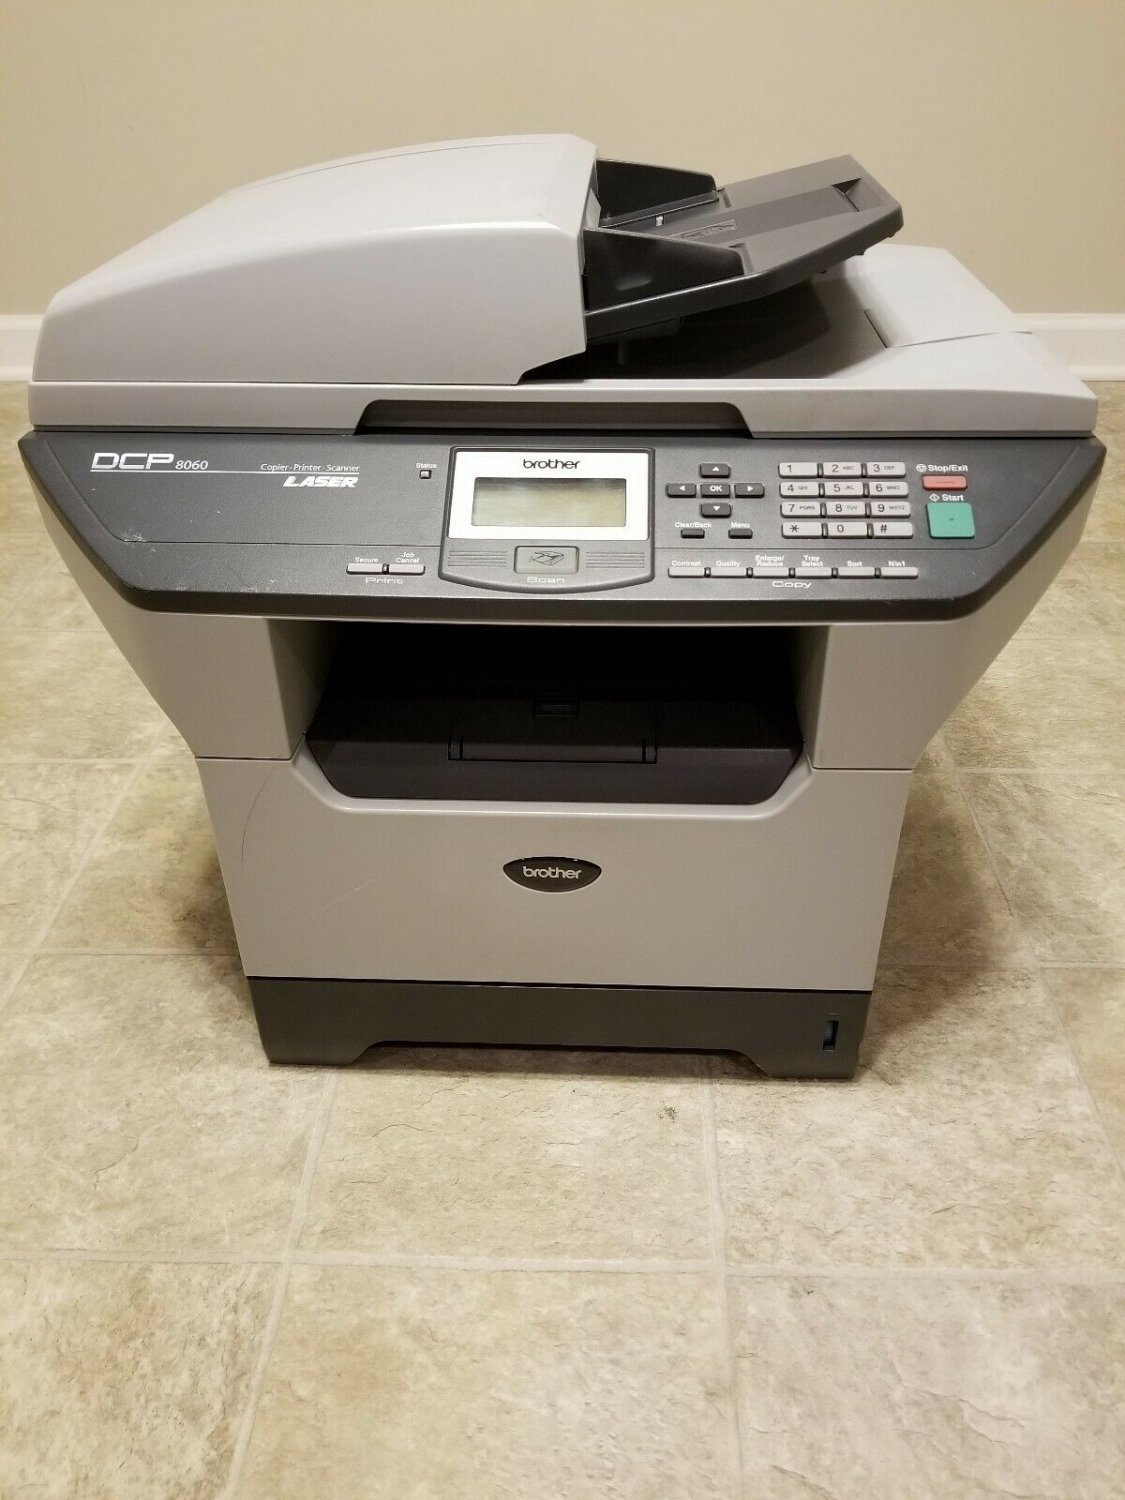 Brother Dcp 8060 All In One Laser Printer 8036